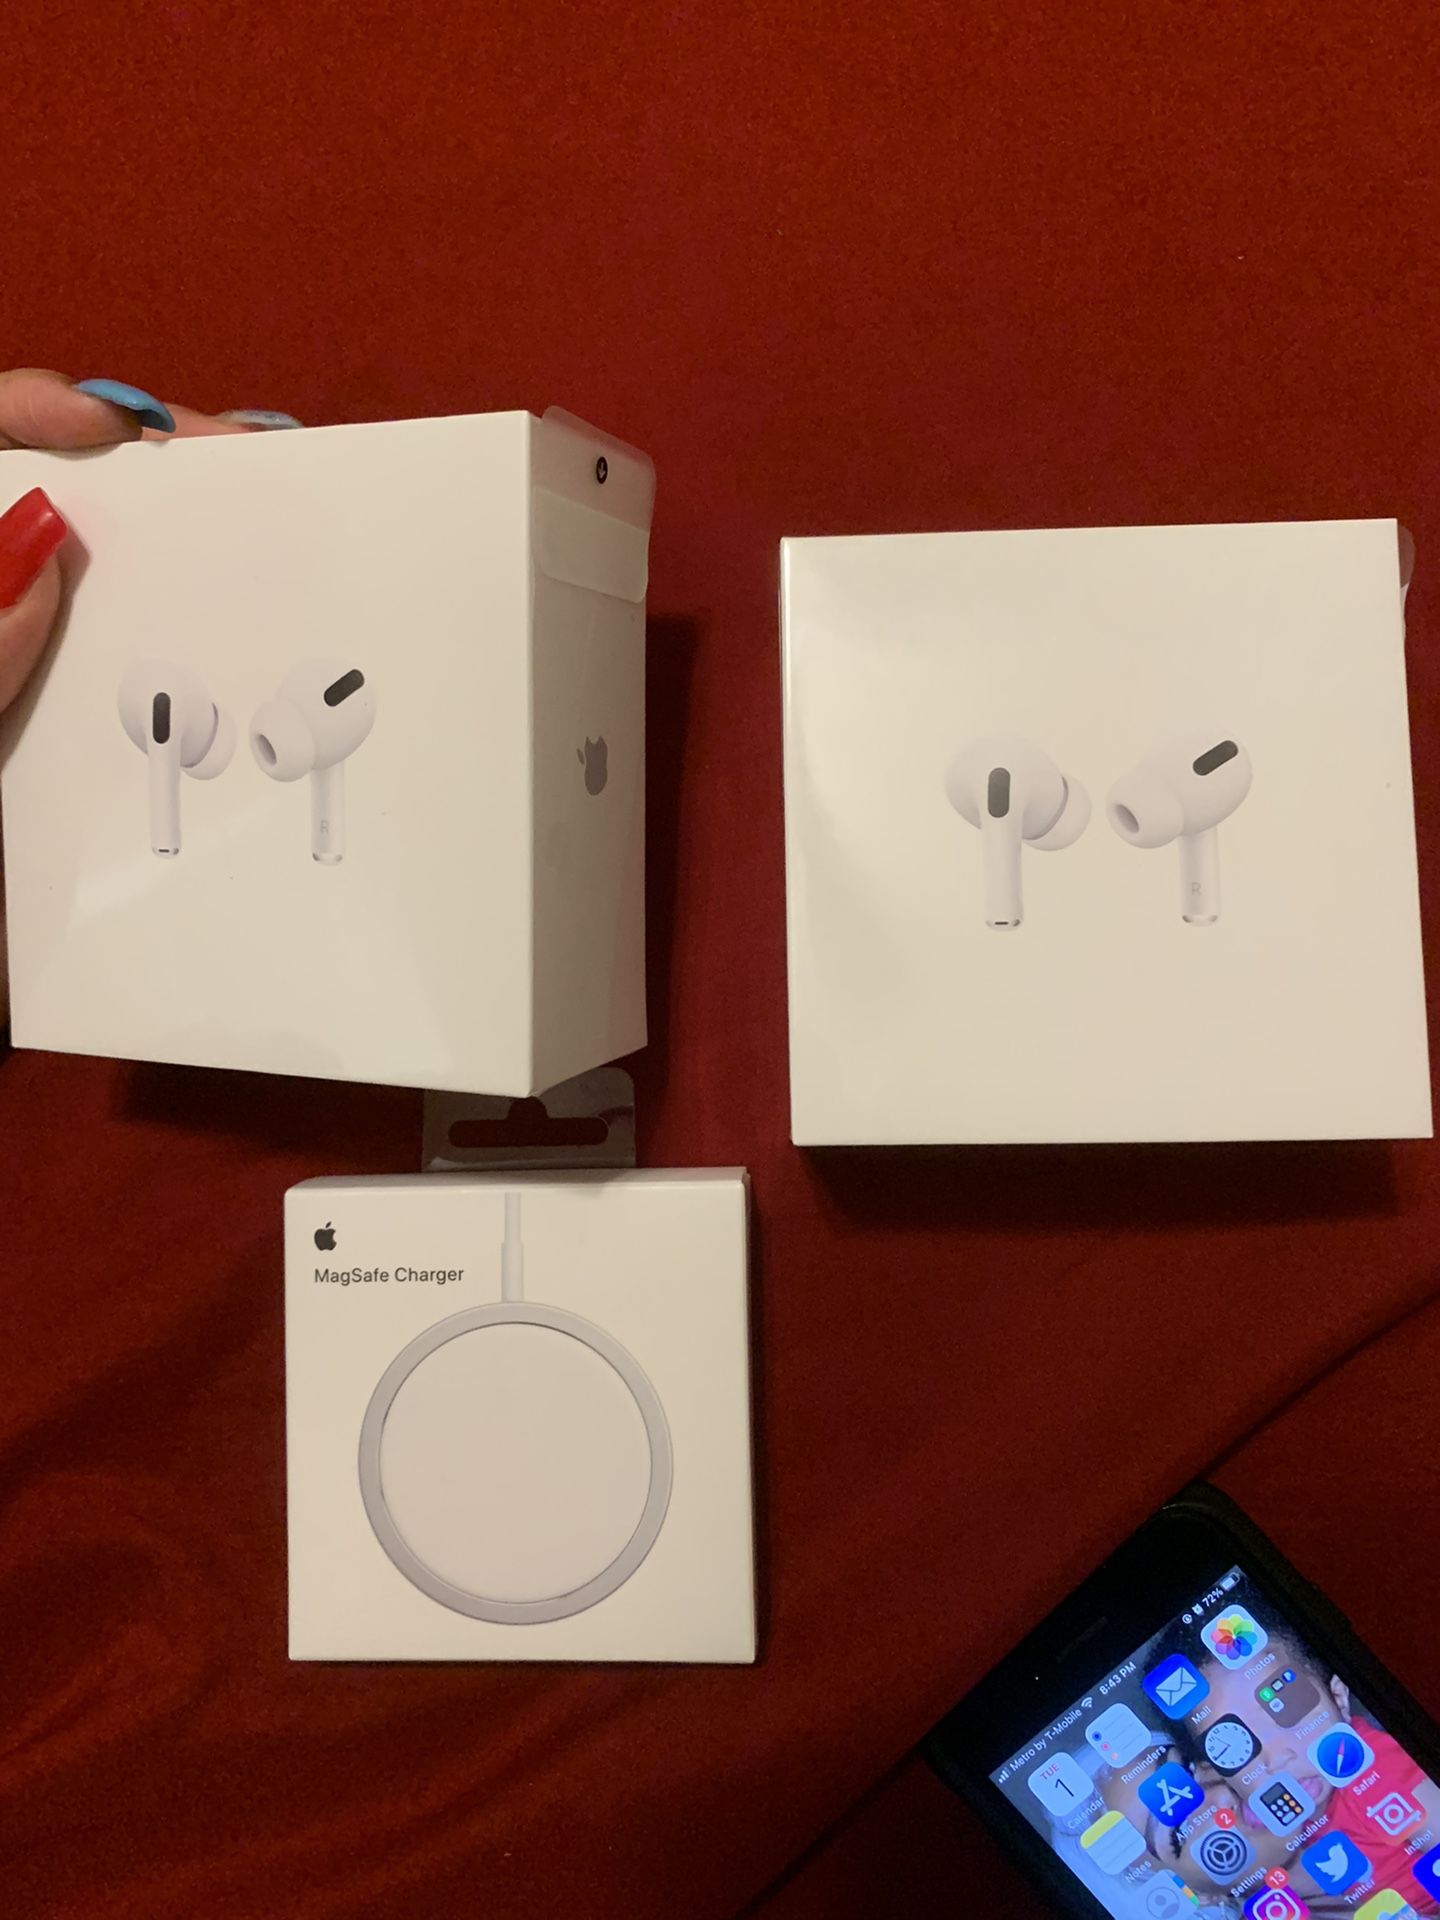 New AirPods Ready For Purchase